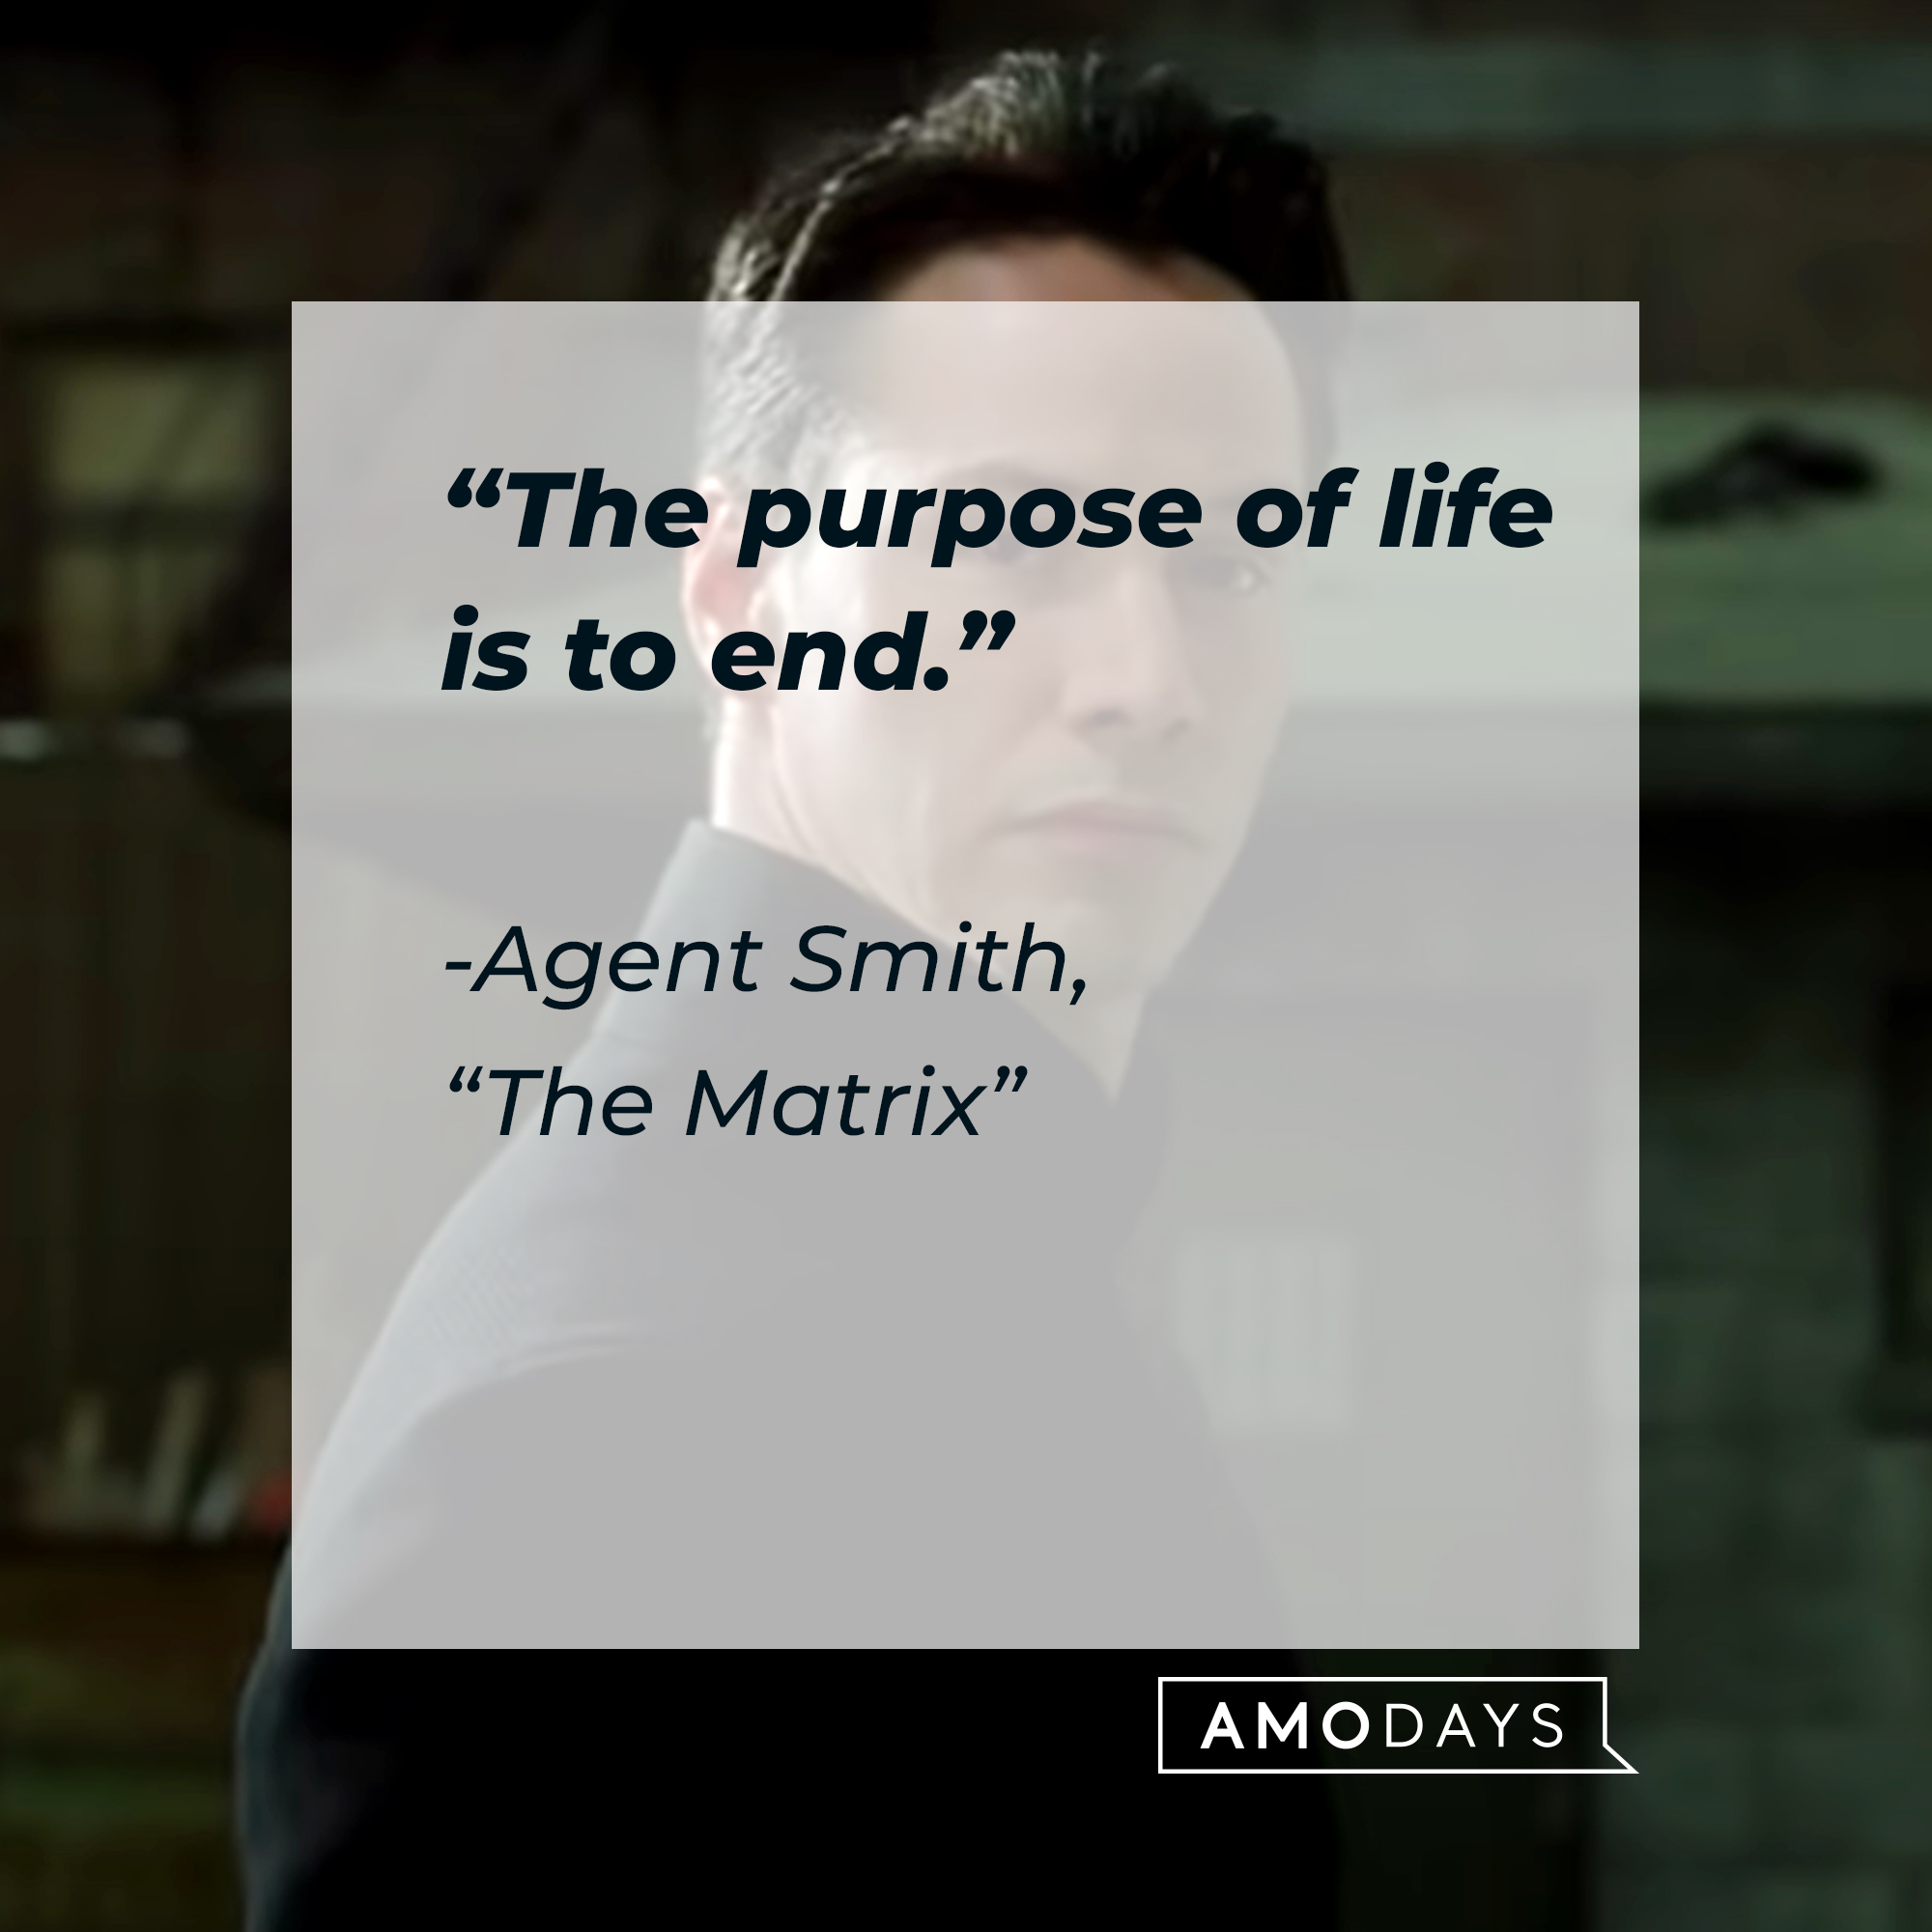 Agent Smith with his quote: "The purpose of life is to end." | Source: Facebook.com/TheMatrixMovie